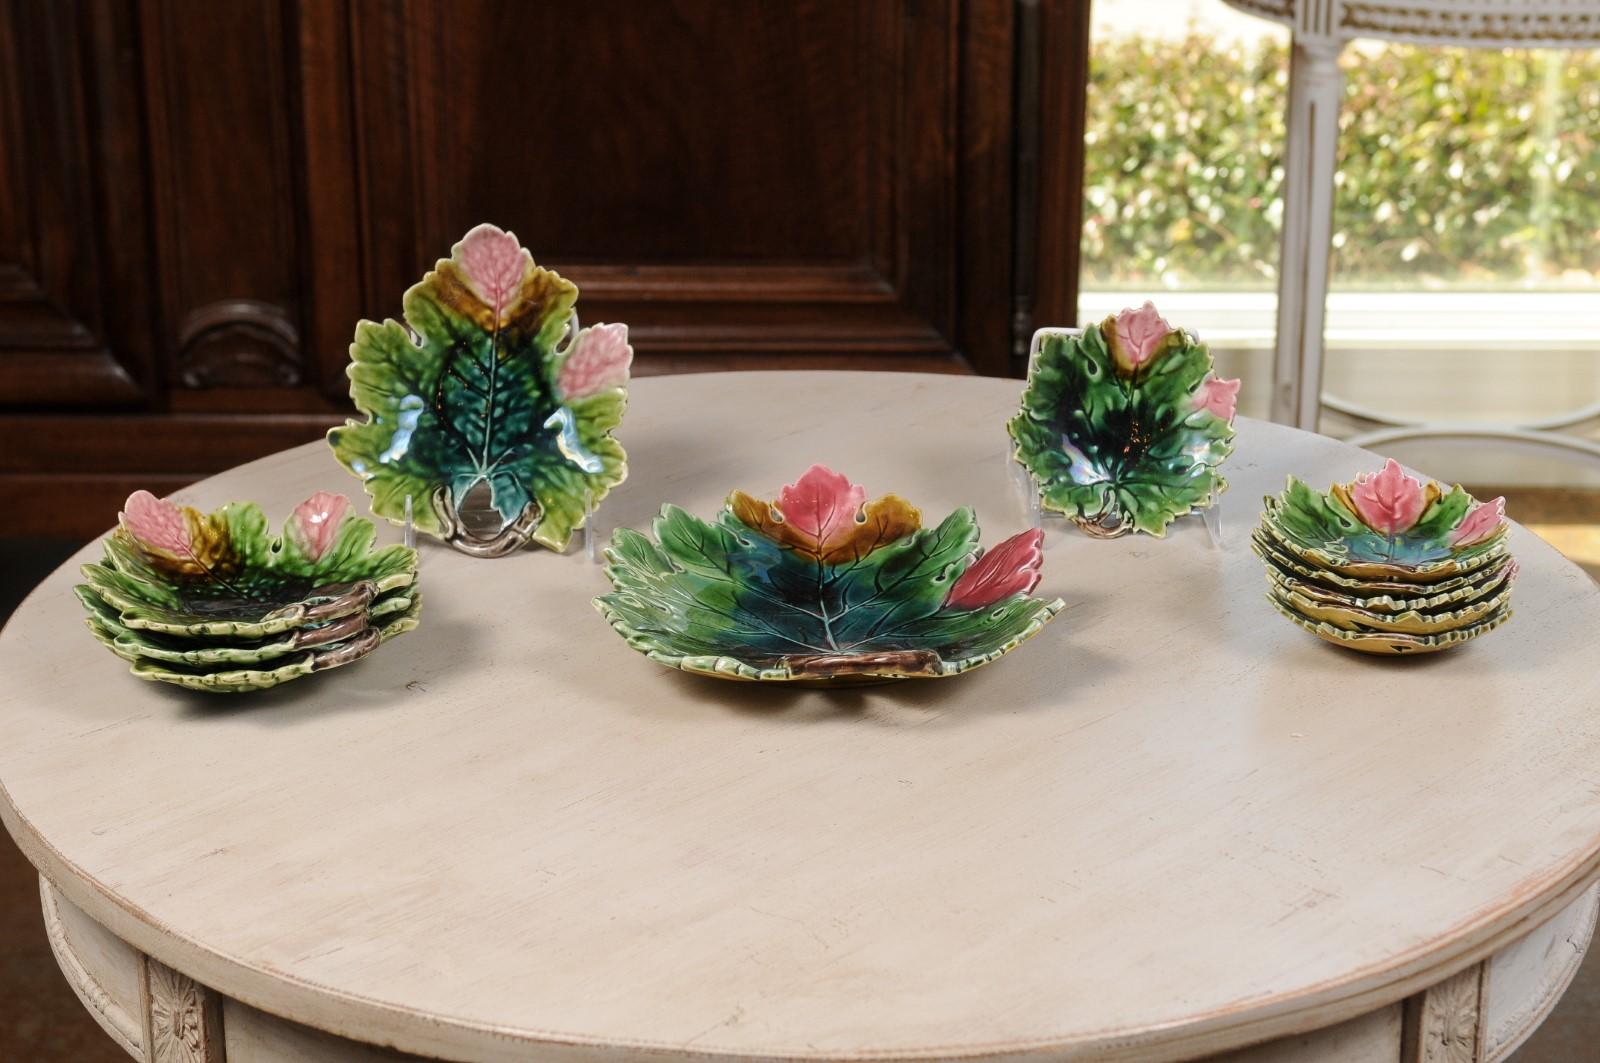 A set of 11 French Majolica leaf dinner plates from the 19th century, with pink, green and brown décor. Born in France during the 19th century, each of this set of majolica plates charms our eyes with its whimsical silhouette. Shaped as leaves, the